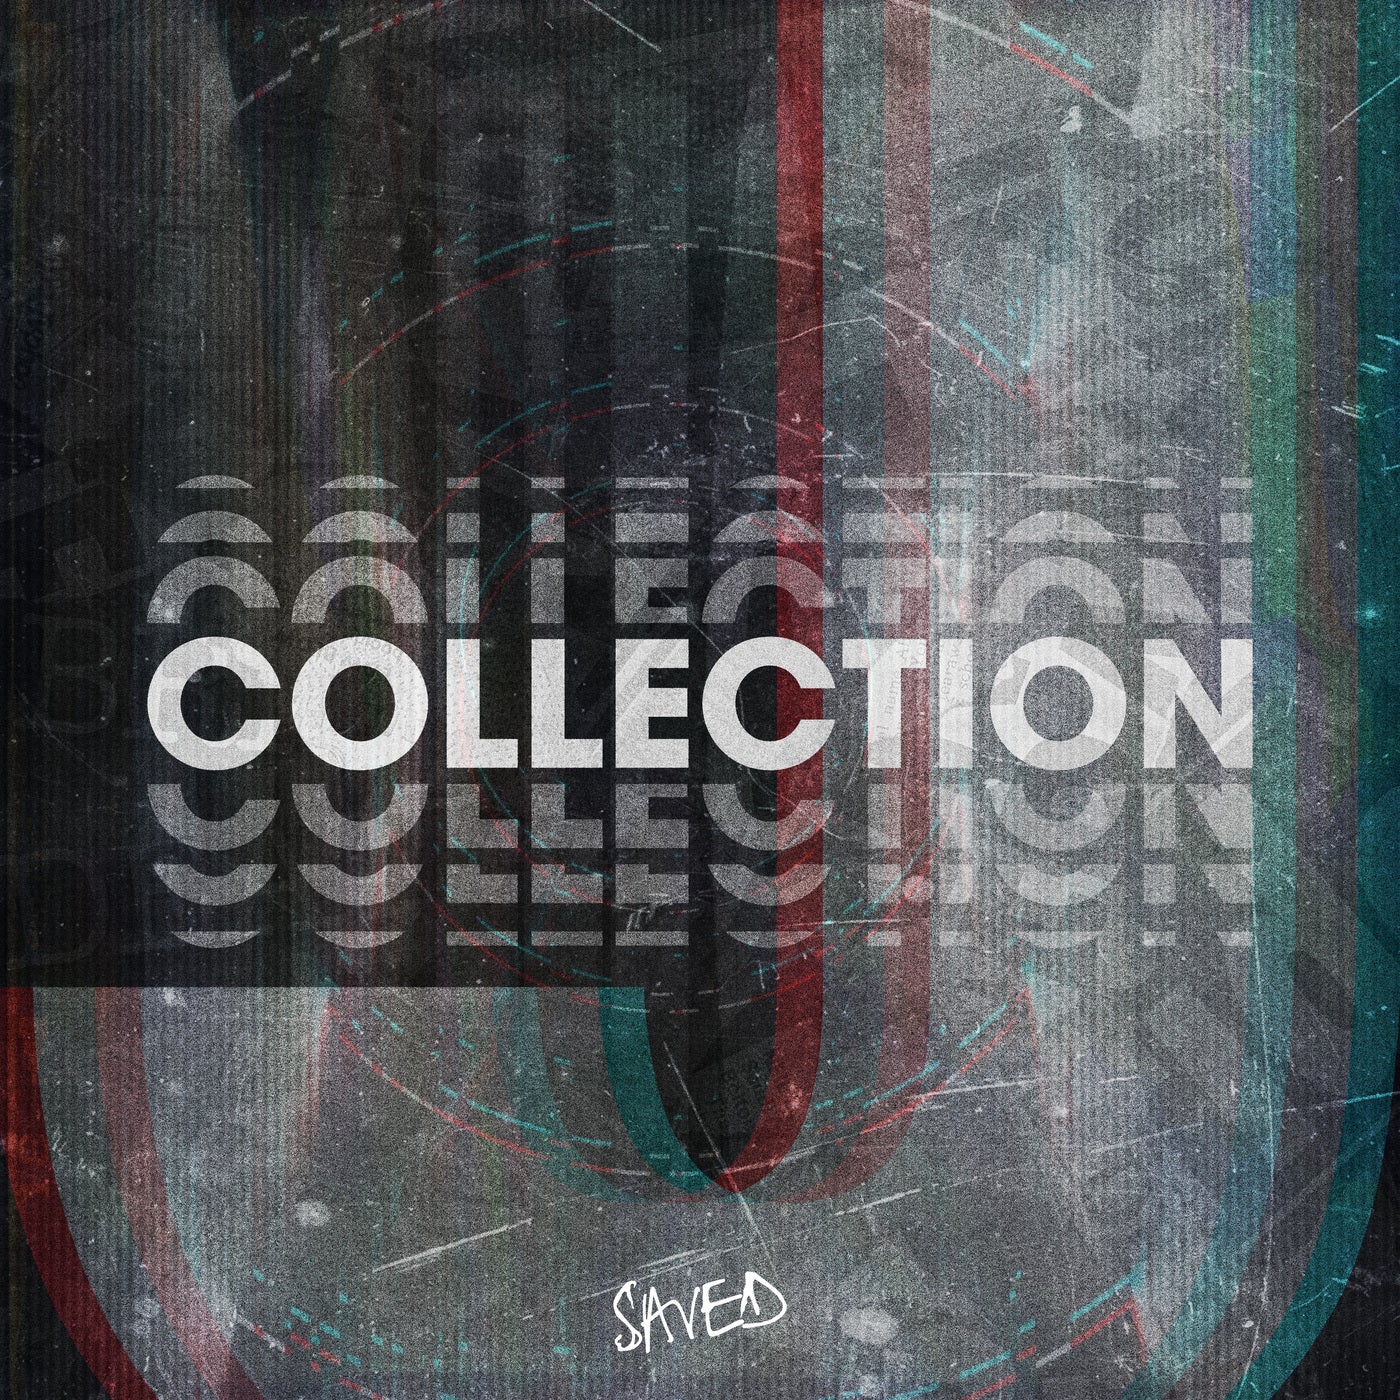 Download Saved - Collection J on Electrobuzz